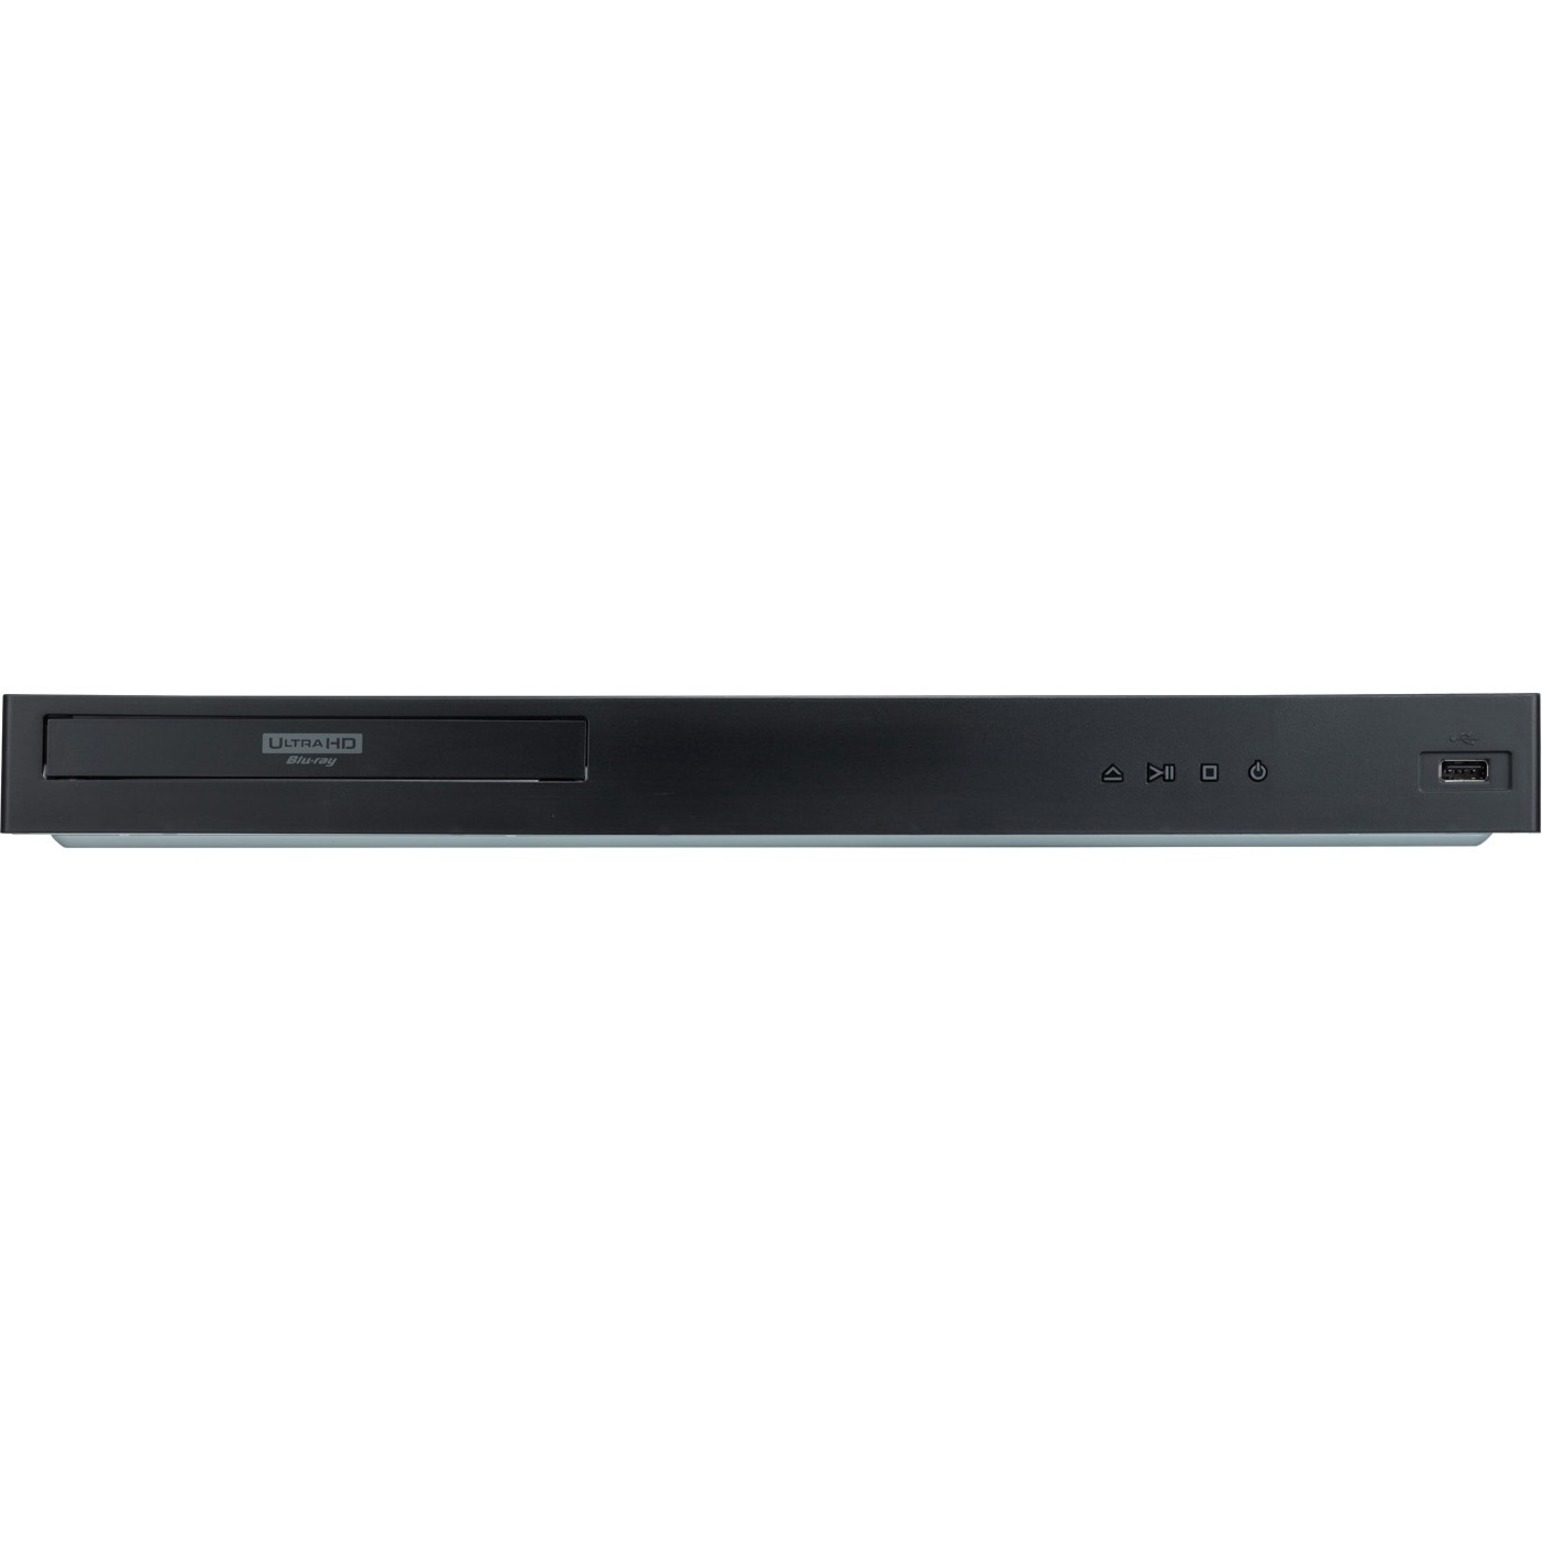 LG UBK90 1 Disc(s) 3D Blu-ray Disc Player, 2160p - image 1 of 14